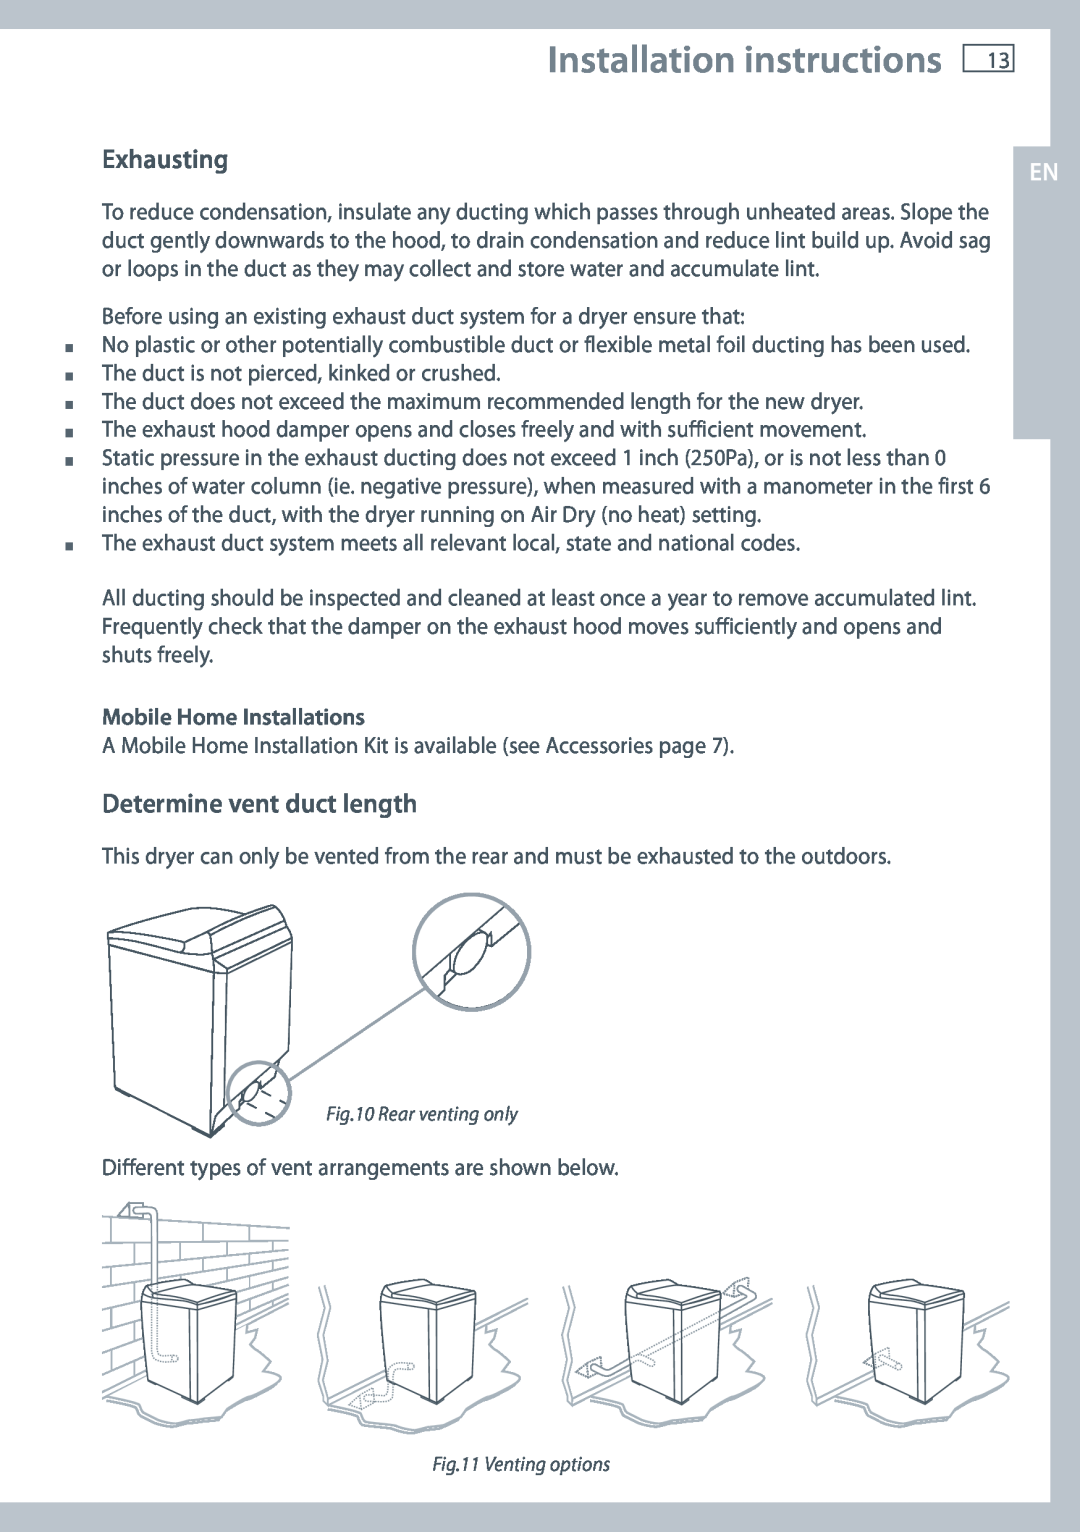 Fisher & Paykel DE62T27C Installation instructions, Exhausting, Determine vent duct length, Mobile Home Installations 